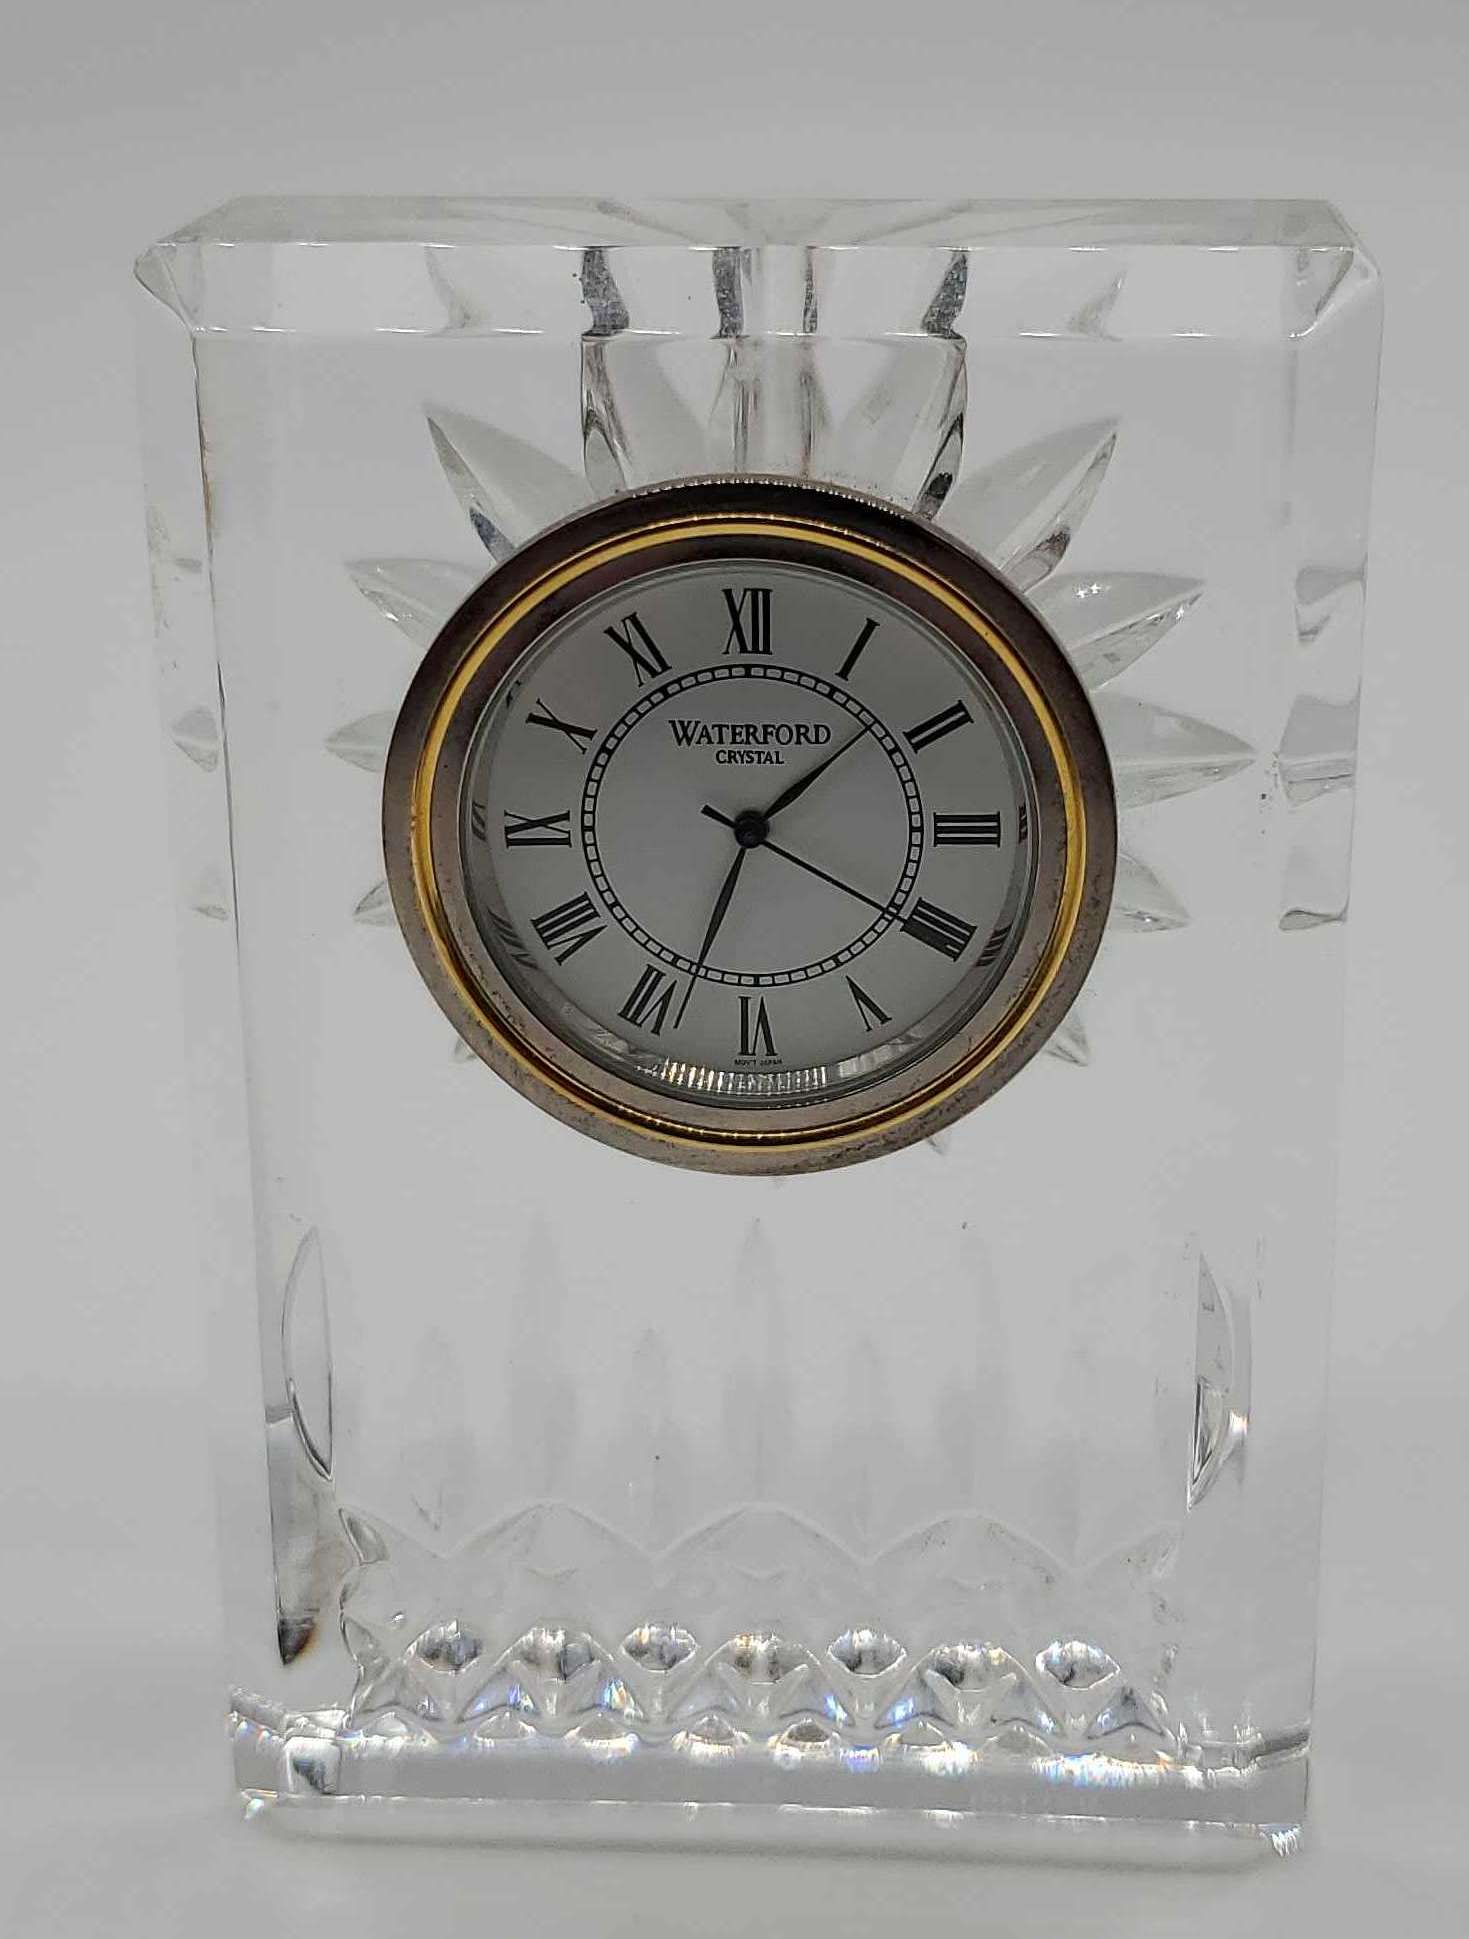 How To Change Waterford Crystal Clock Battery - Desktop Version - YouTube